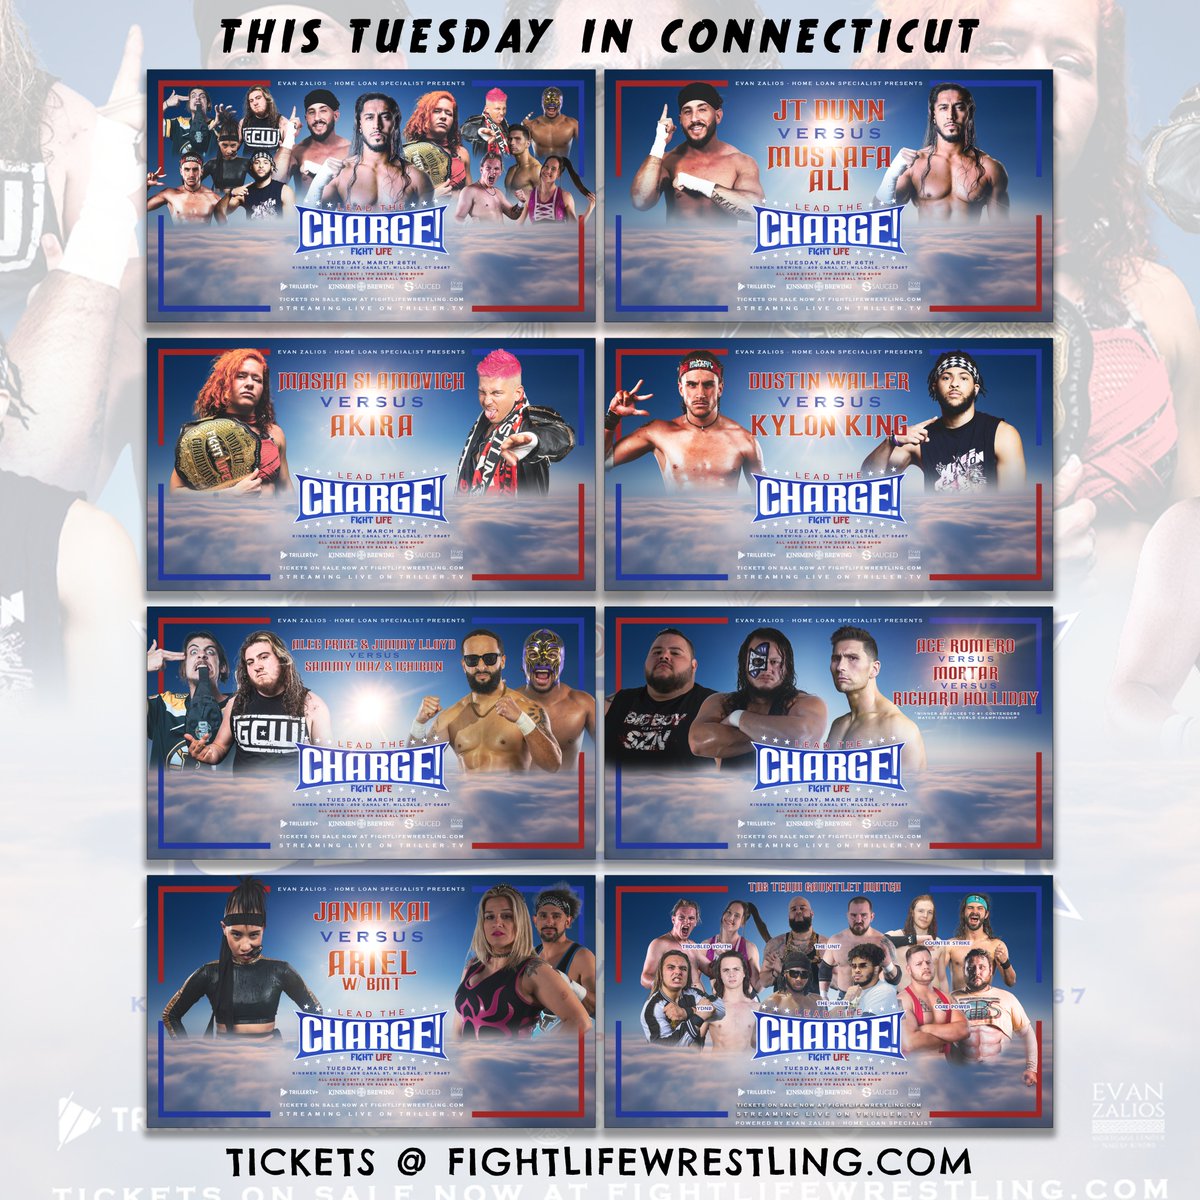 CONNECTICUT - 1 WEEK AWAY 📢Lead The Charge! Tuesday, March 26th Kinsmen Brewing Southington, CT MEET @MustafaAli_X BEFORE THE SHOW! Food on sale all night by Sauced 7pm doors, 8pm show All ages 🚨ALMOST SOLD OUT🚨 Tickets: FightLifeWrestling.com Watch LIVE on TrillerTV+